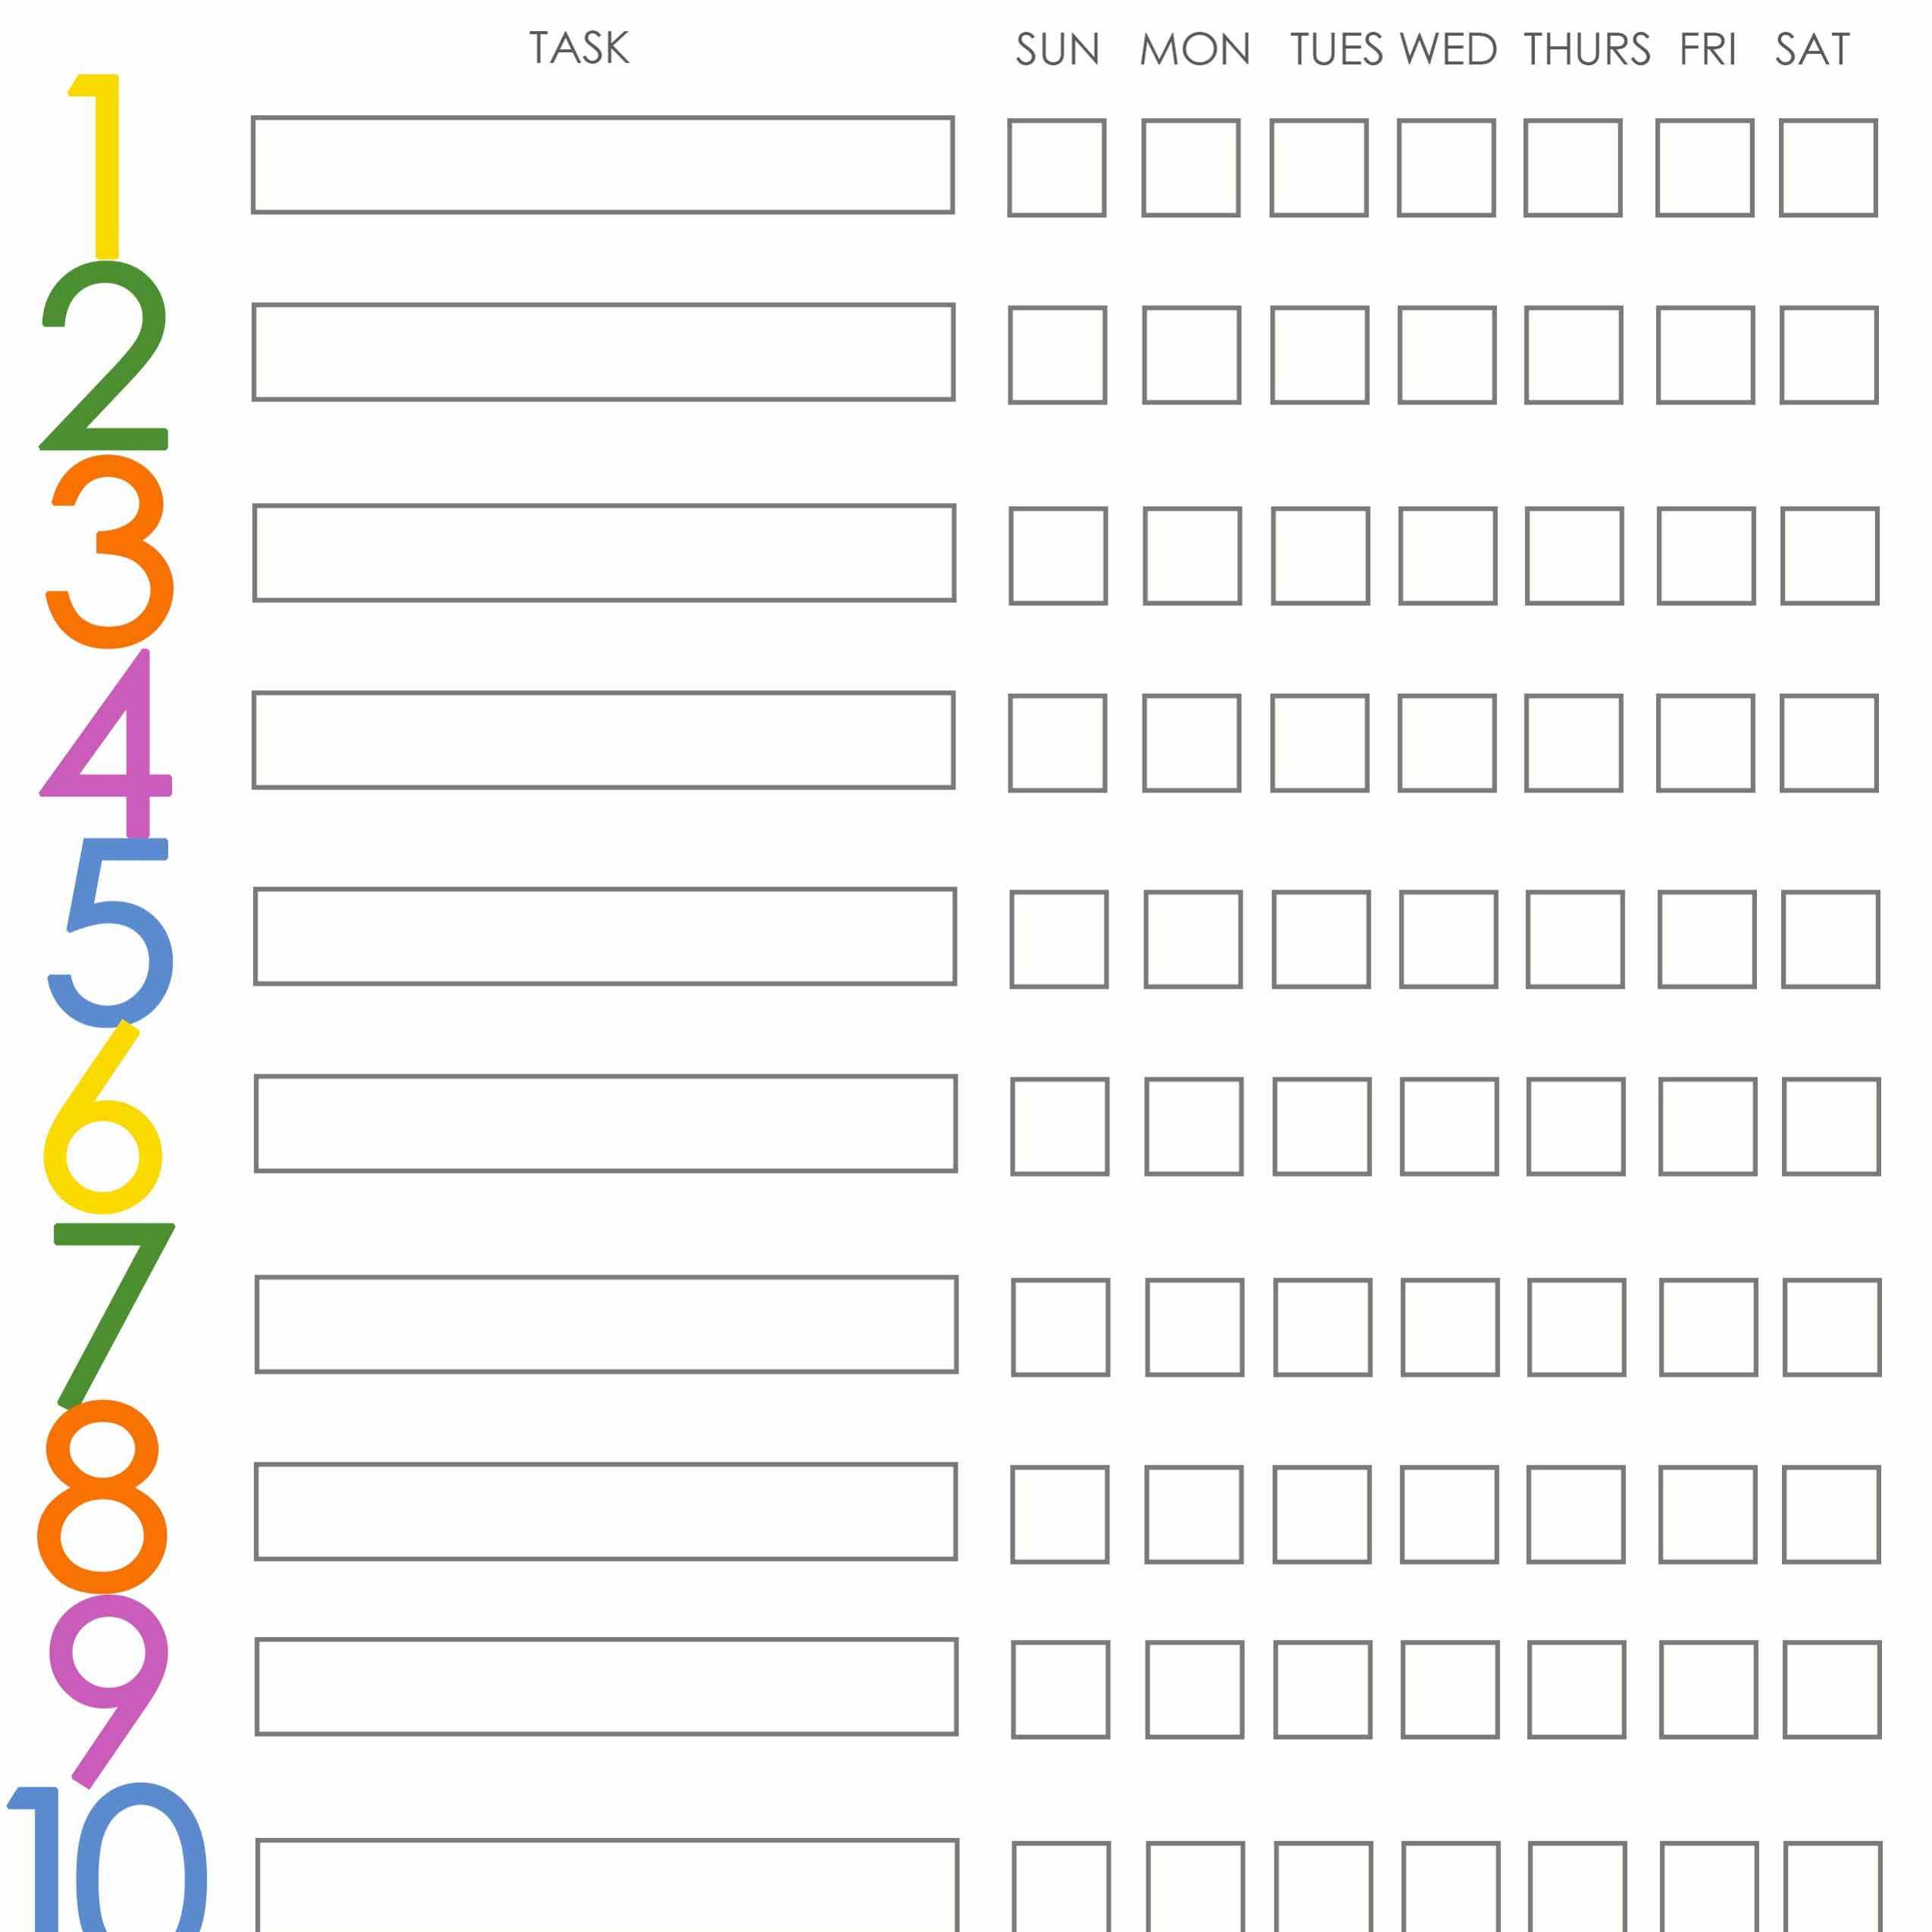 Free Printable Weekly Chore Charts - Free Printable Chore List For Teenager